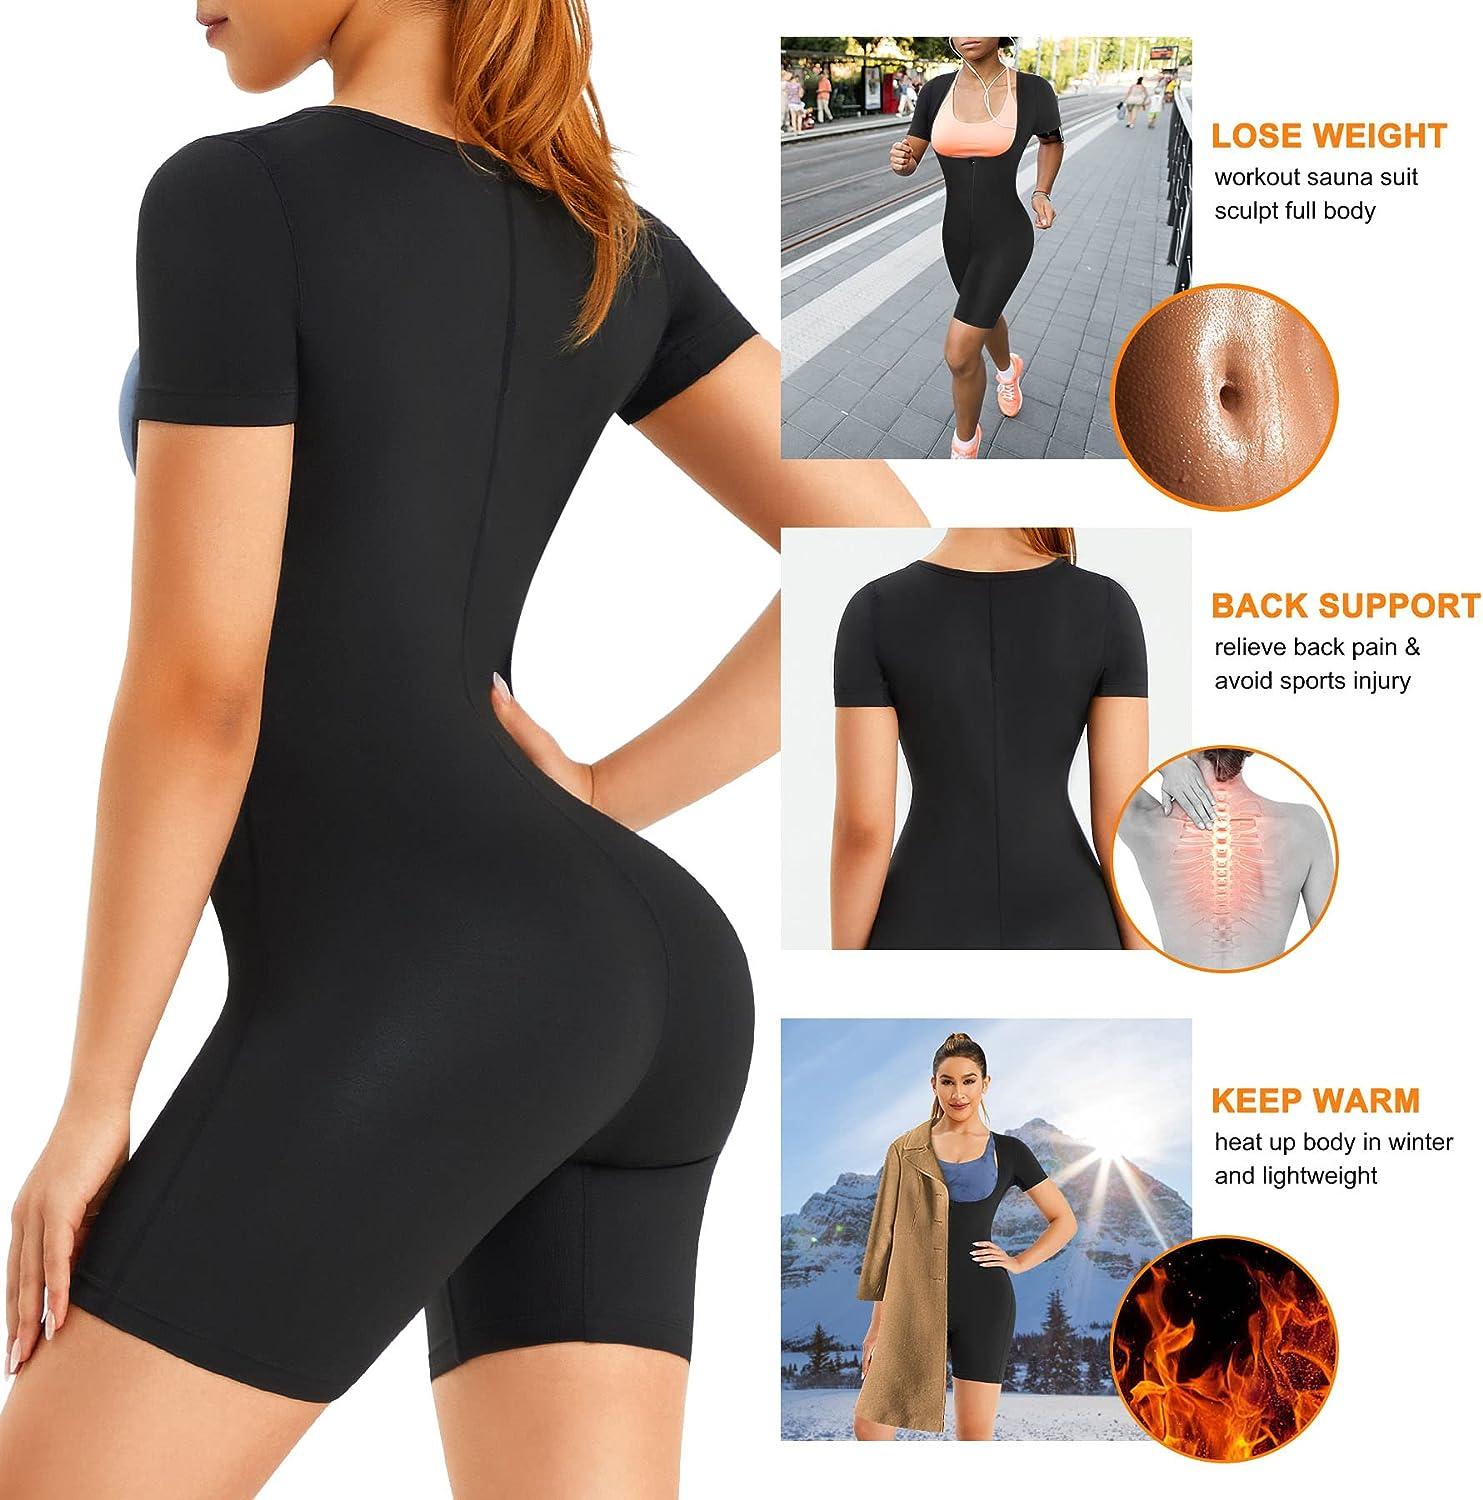  Sauna Sweat Suit Weight Loss Shapewear Top Trainer